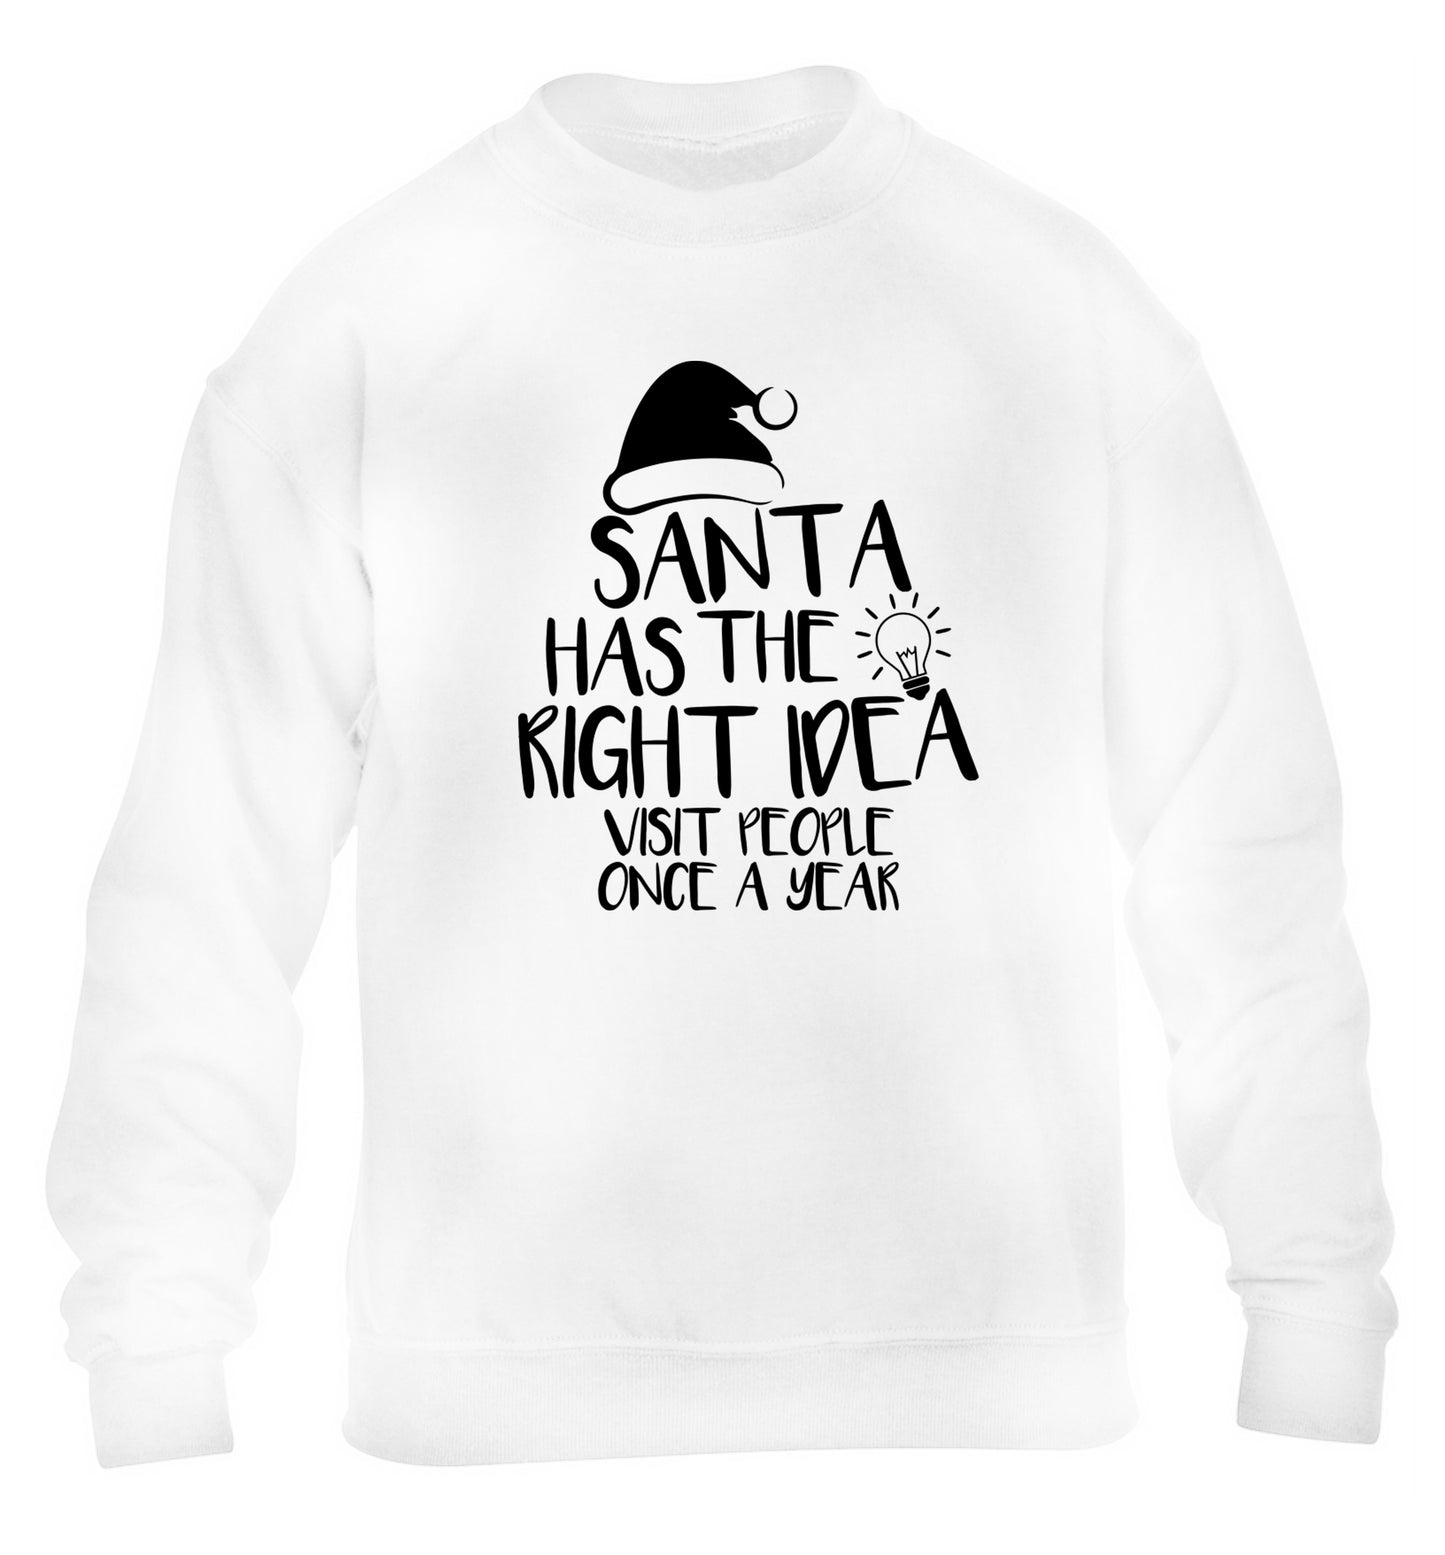 Santa has the right idea visit people once a year children's white sweater 12-14 Years